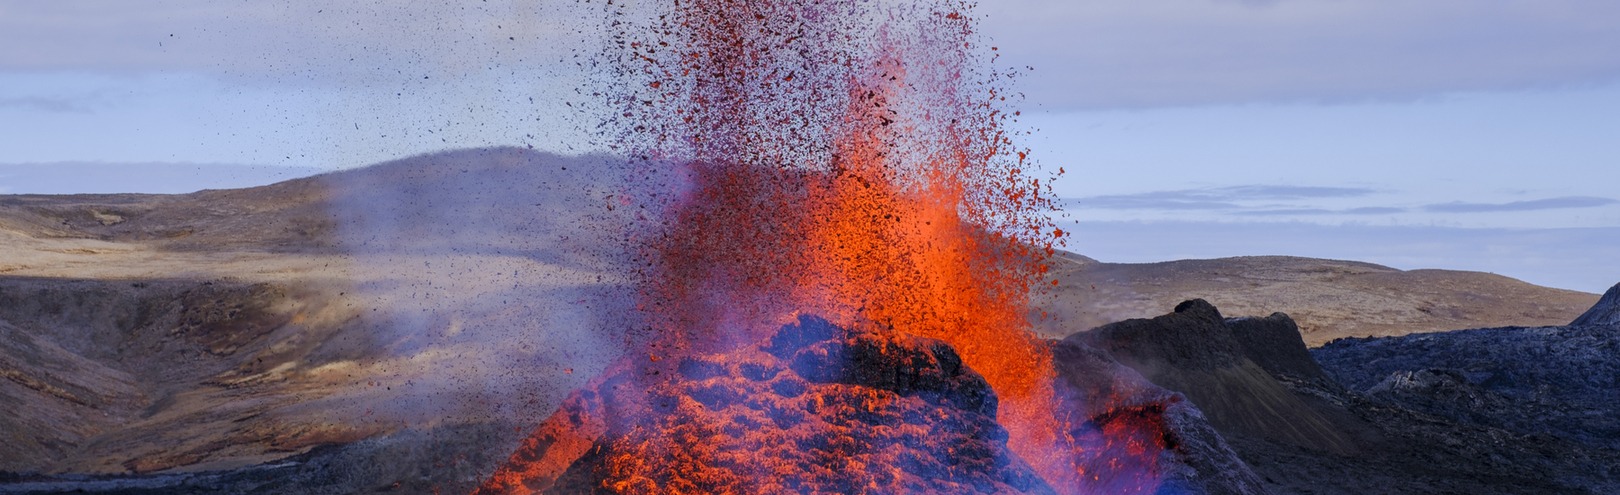 Fagradalsfjall eruption unusual in many ways compared to other eruptions - Available at University of Iceland